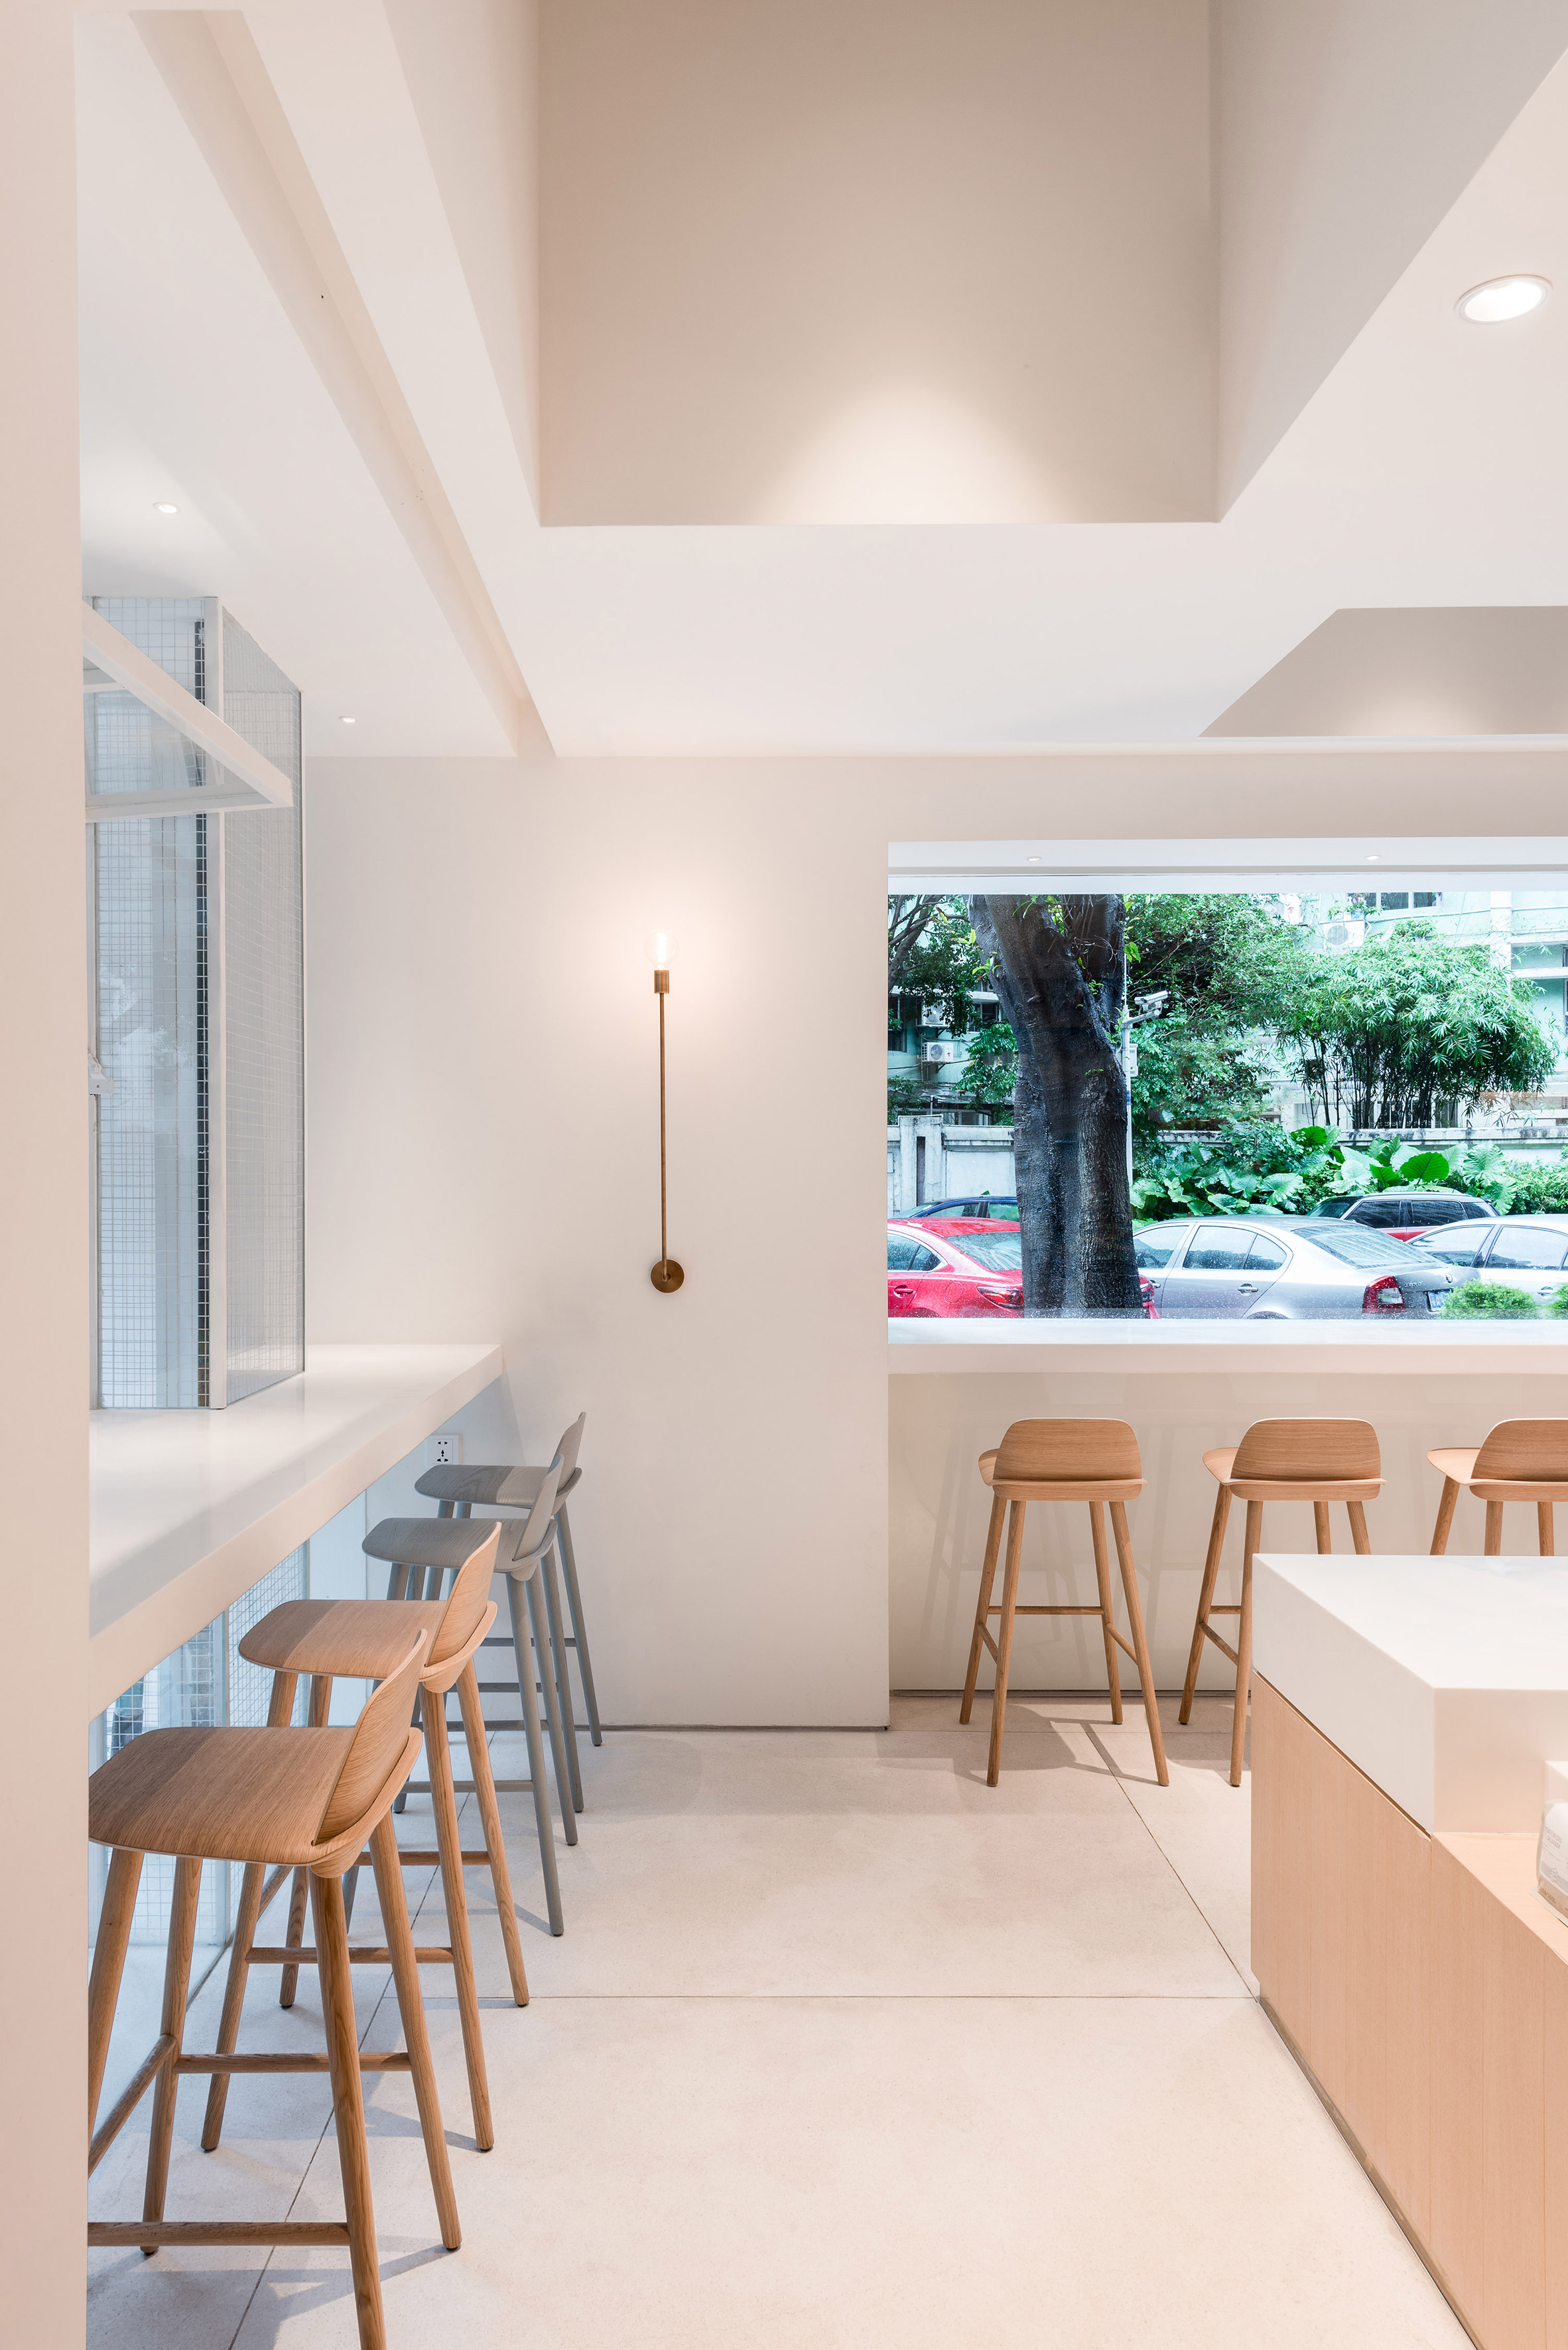 in-and-between-boxes-lukstudio-interiors-atelier-peter-fong-offices-china_dezeen_2364_col_8